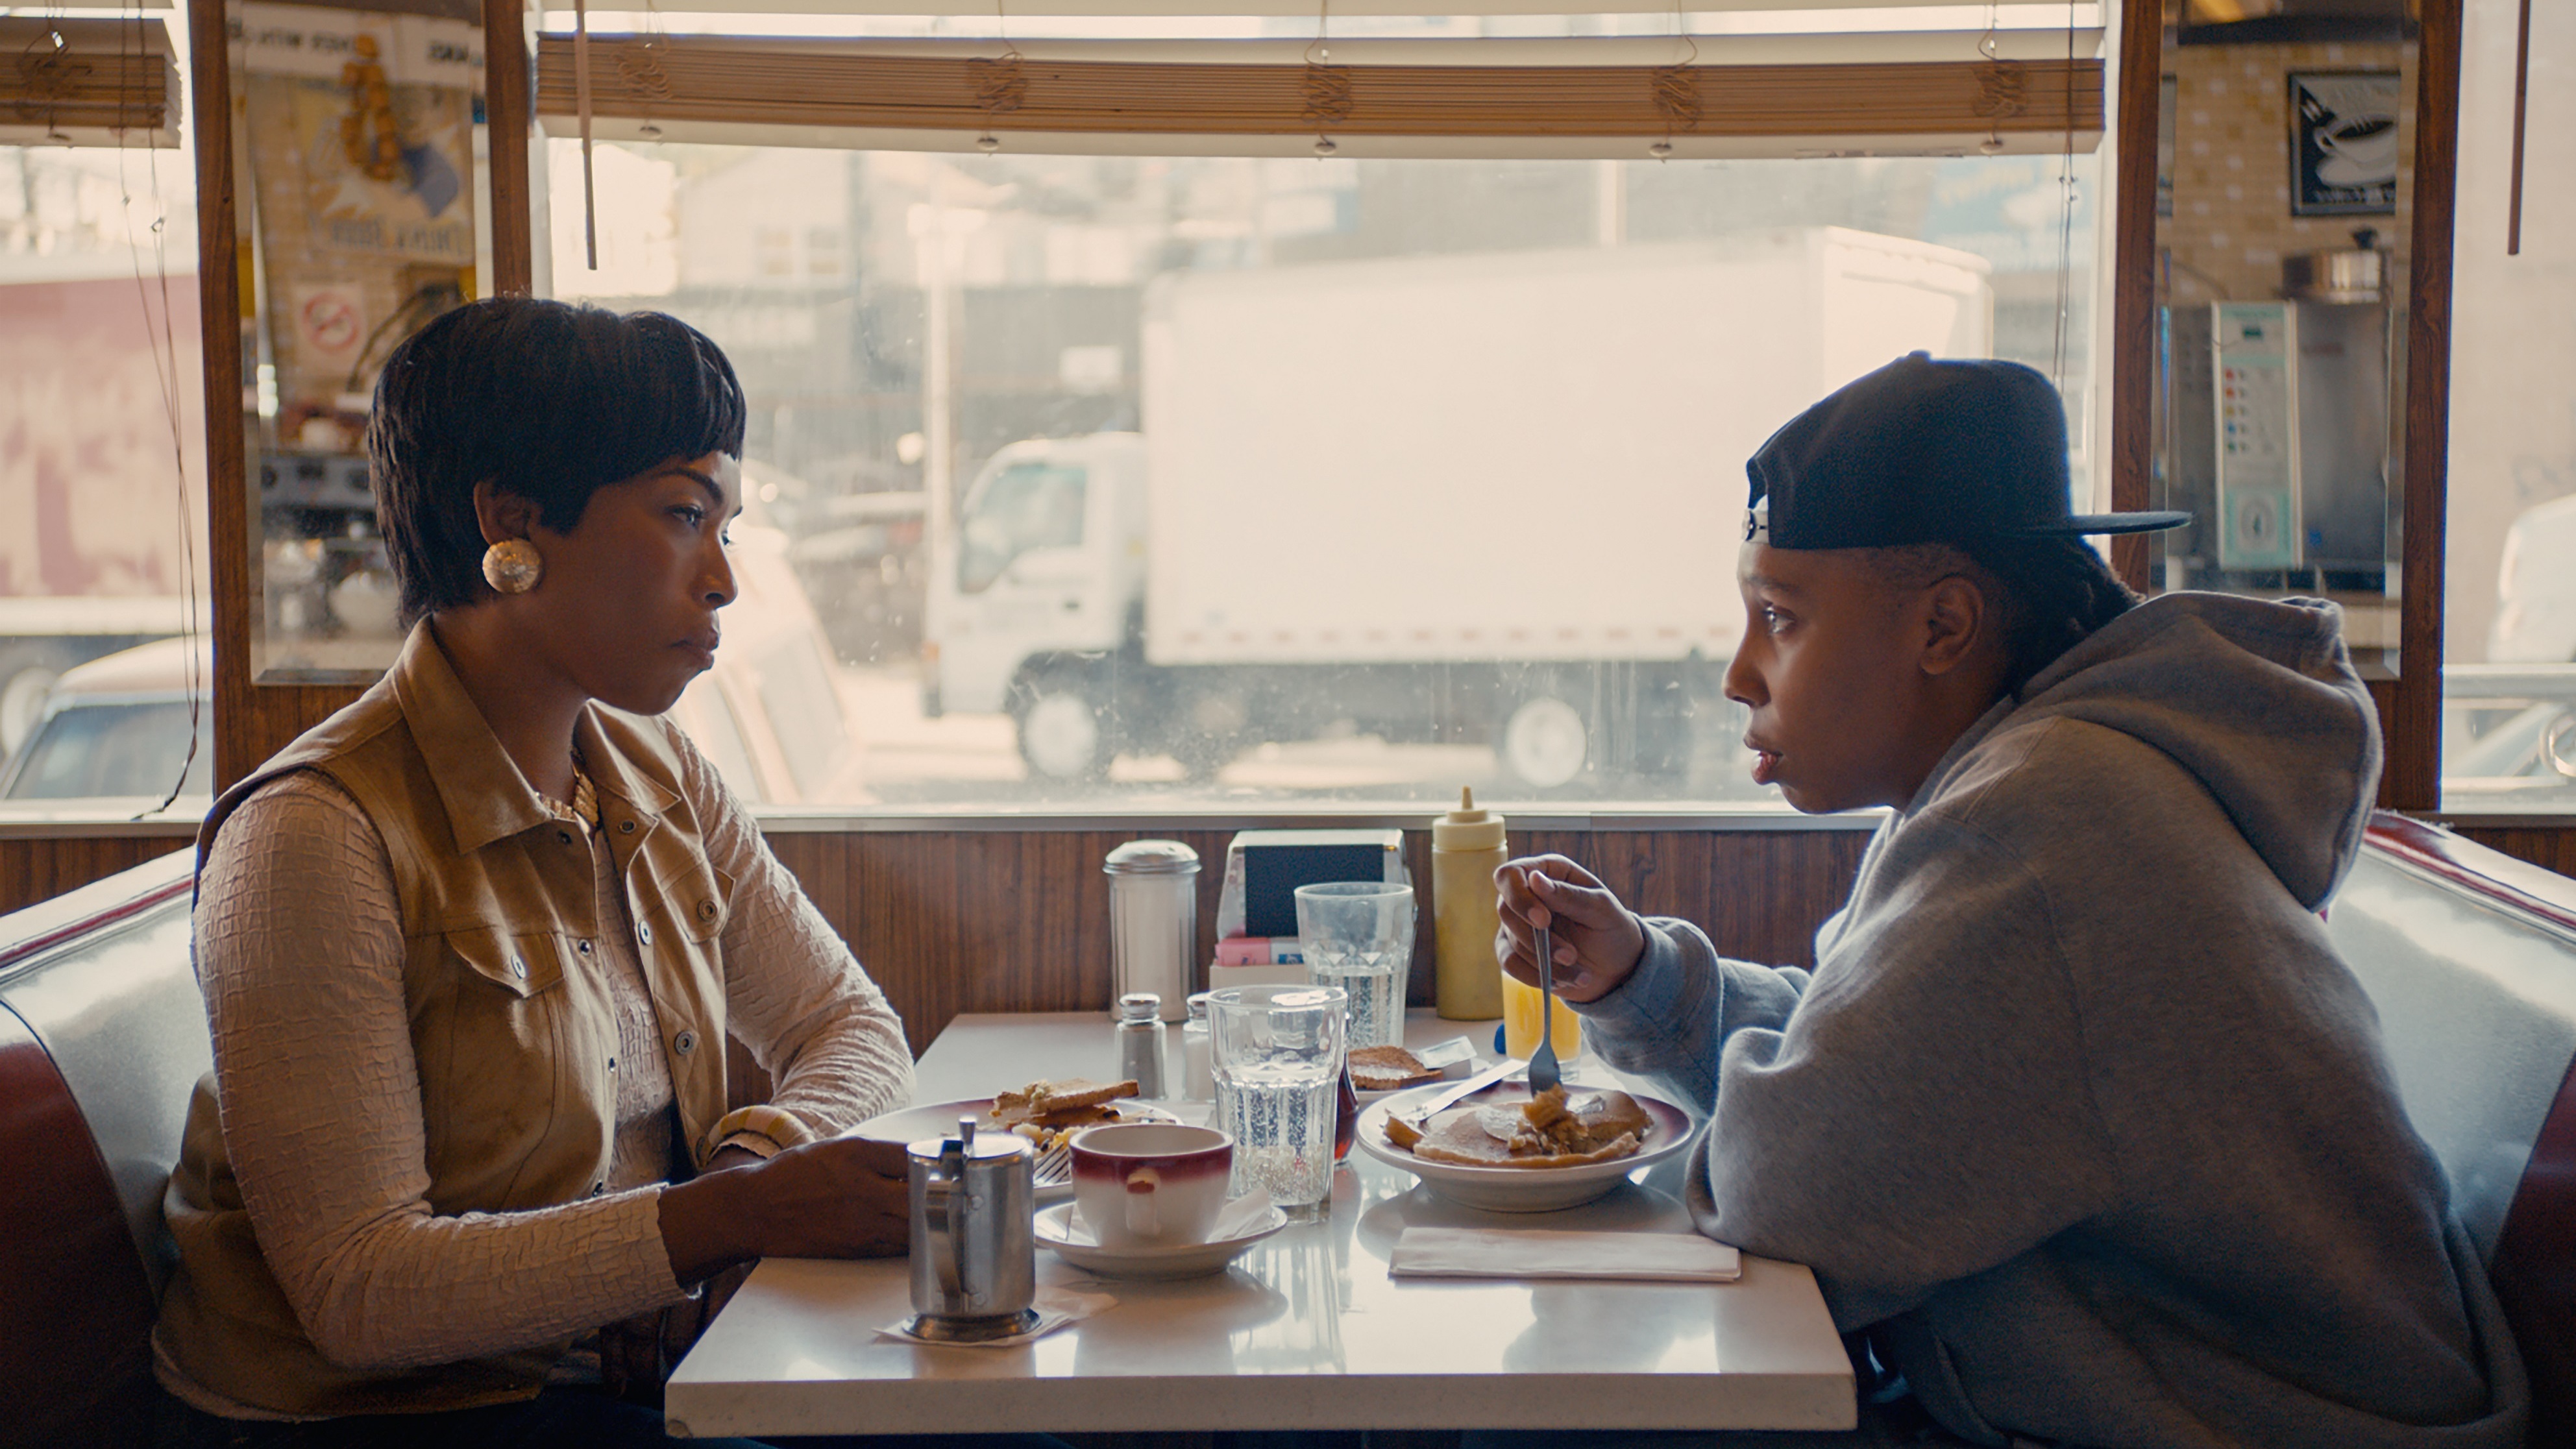 Lena Waithe's character, Denise, comes out to her mother (played by Angela Bassett) in the 